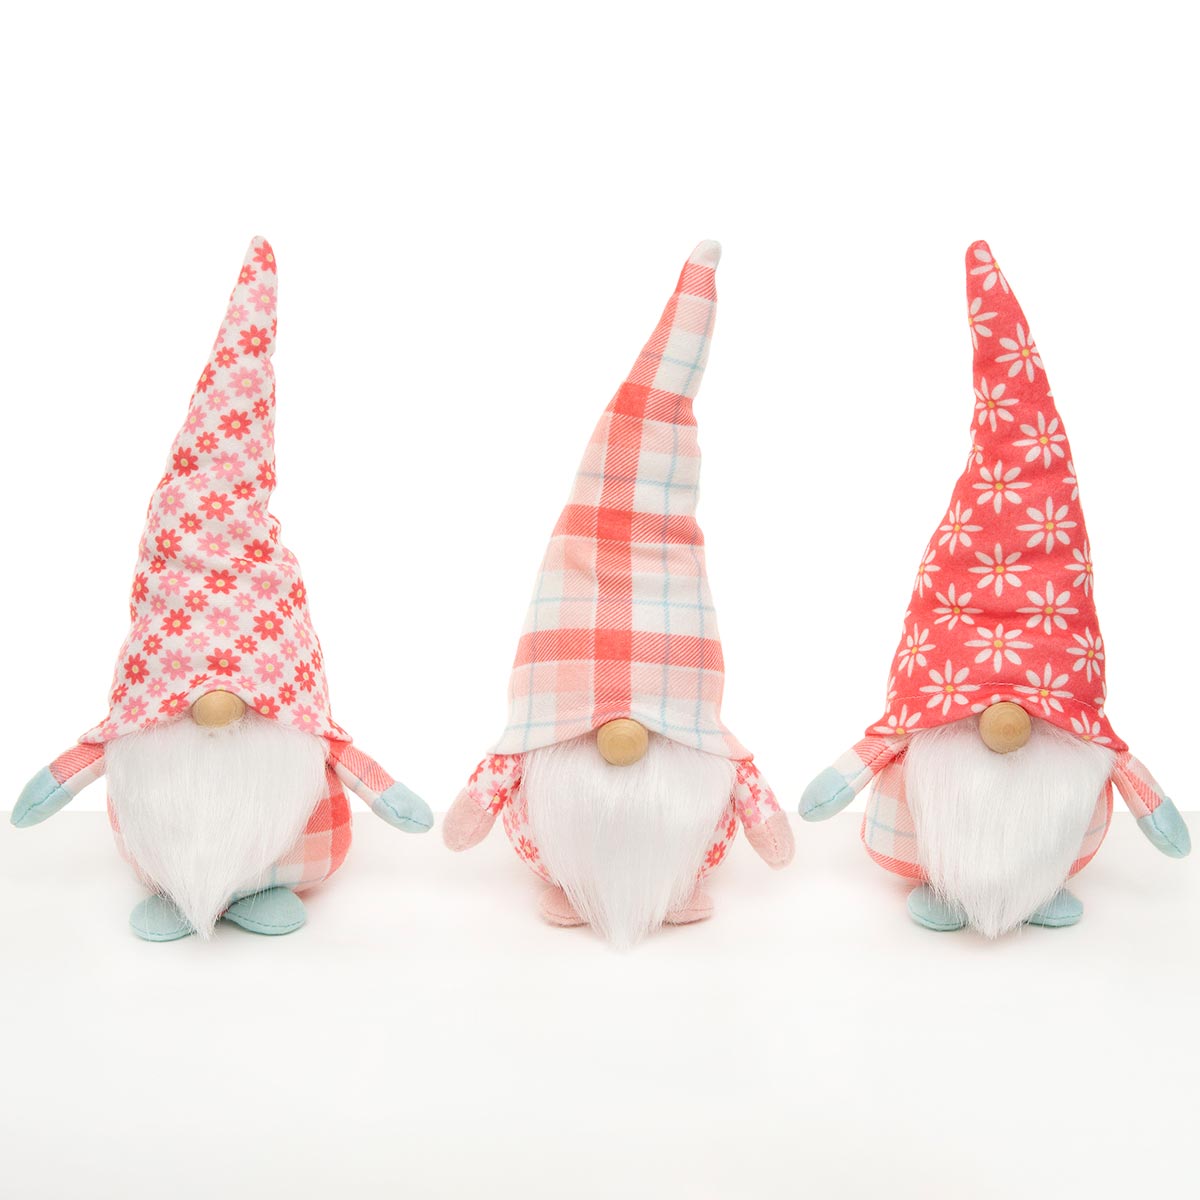 CORAL FAIR GNOME CORAL/WHITE/BLUE WITH WIRED HAT,